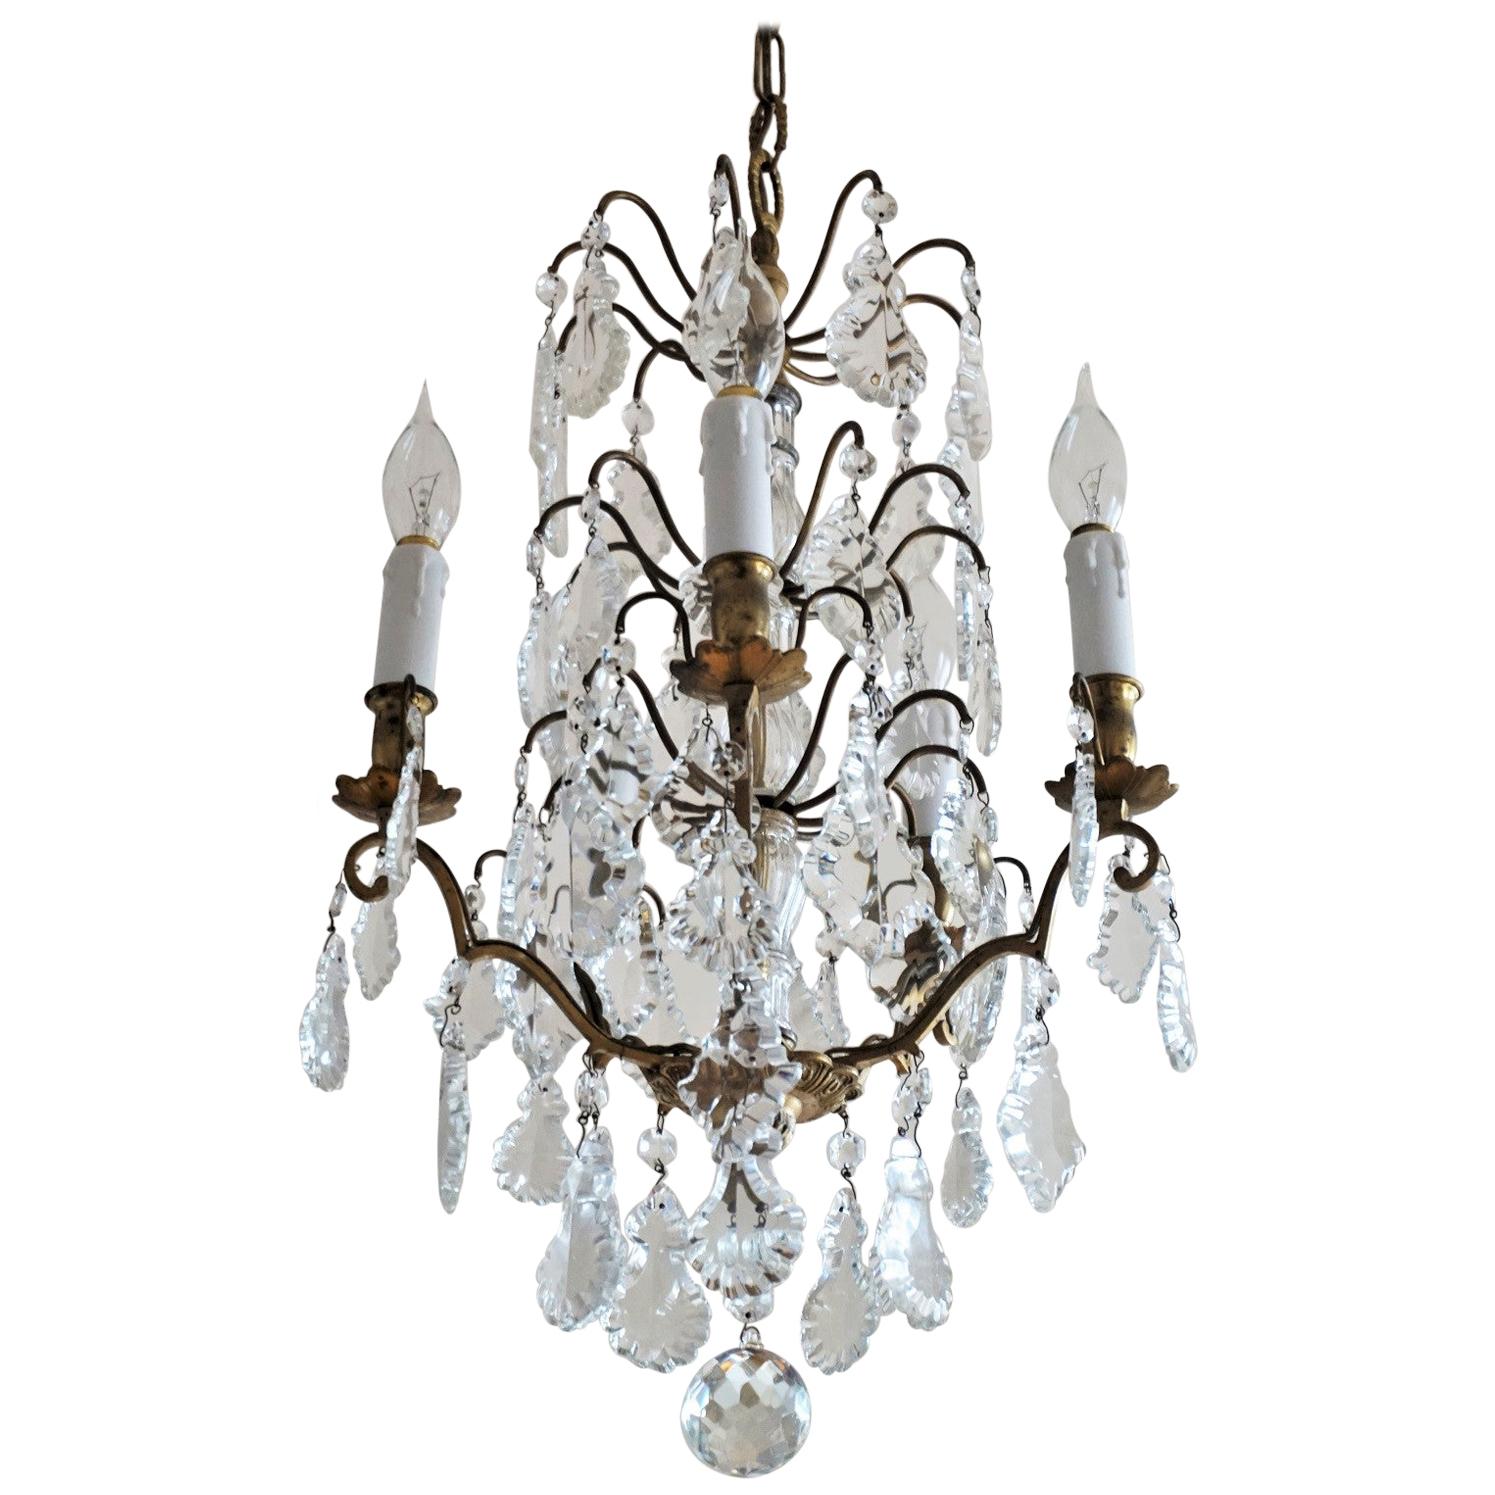 A lovely antique Baccarat crystal electrified chandelier, gilt brass beautifully decorated with several tiers of large pendaloques in different shapes and sizes, finishing at the bottom with a large clear cut crystal ball, includiing chain and